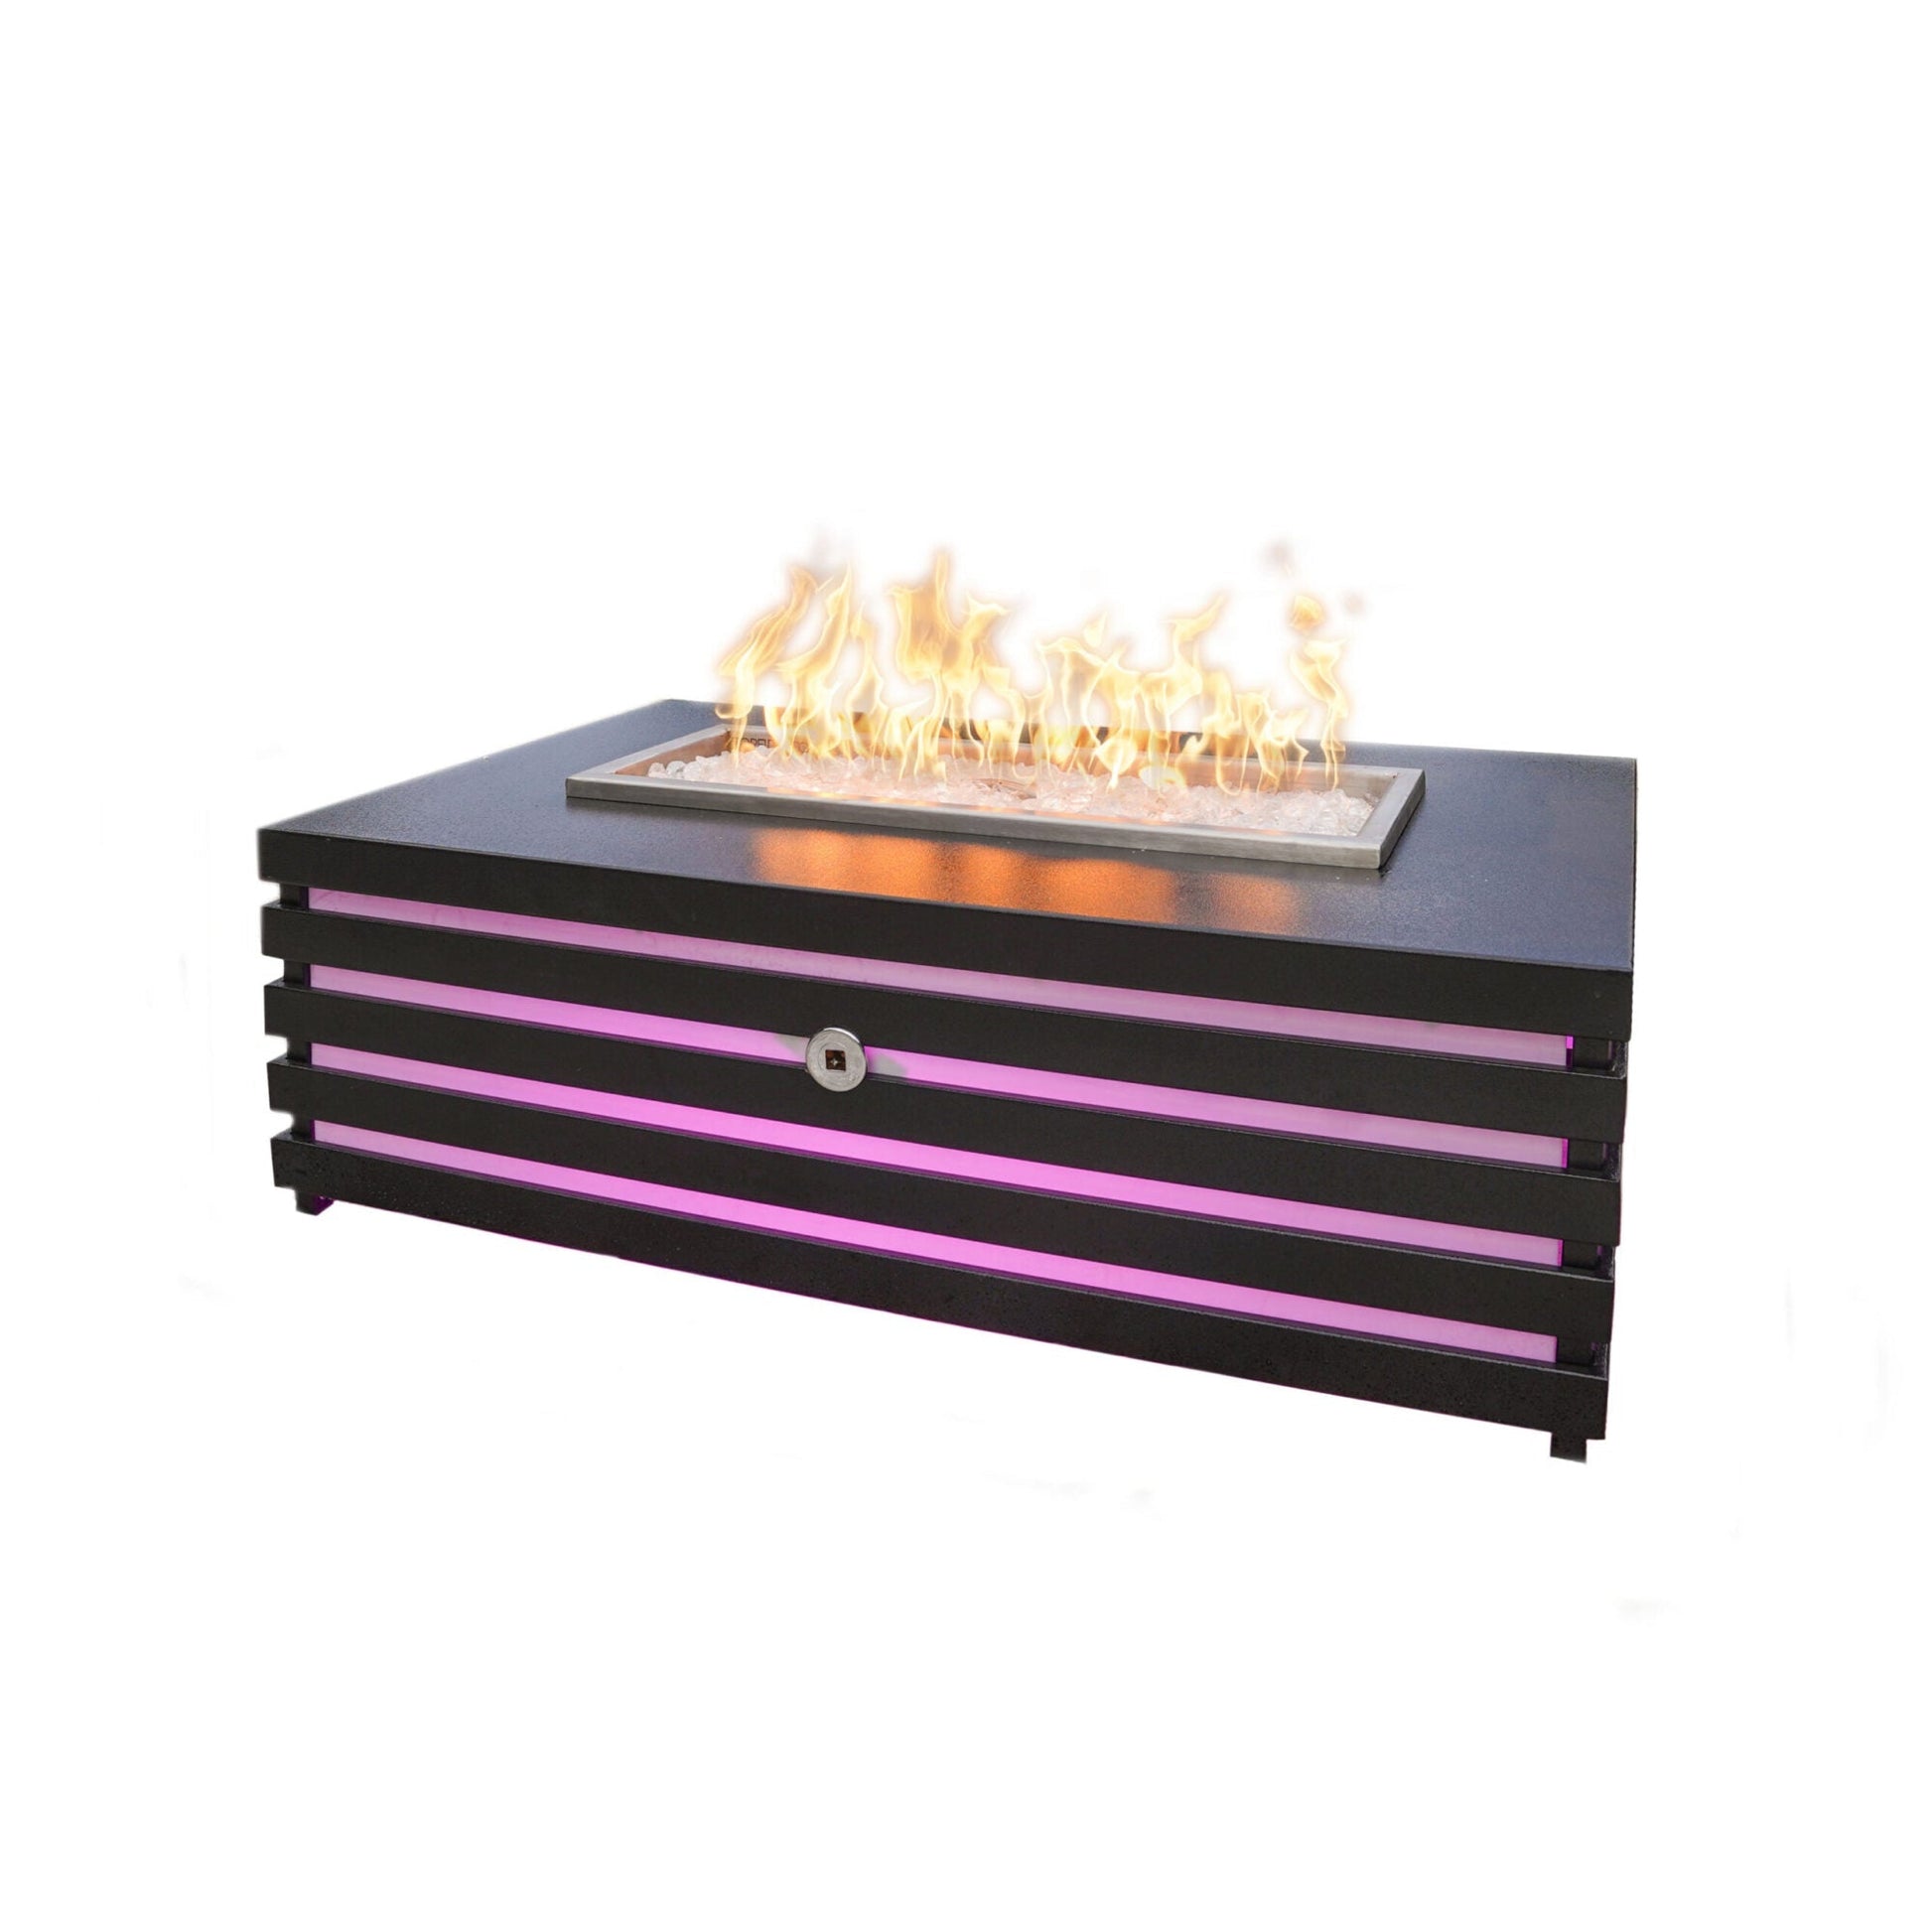 The Outdoor Plus Amina 60" White Powder Coated Natural Gas Fire Pit with 110V Electronic Ignition